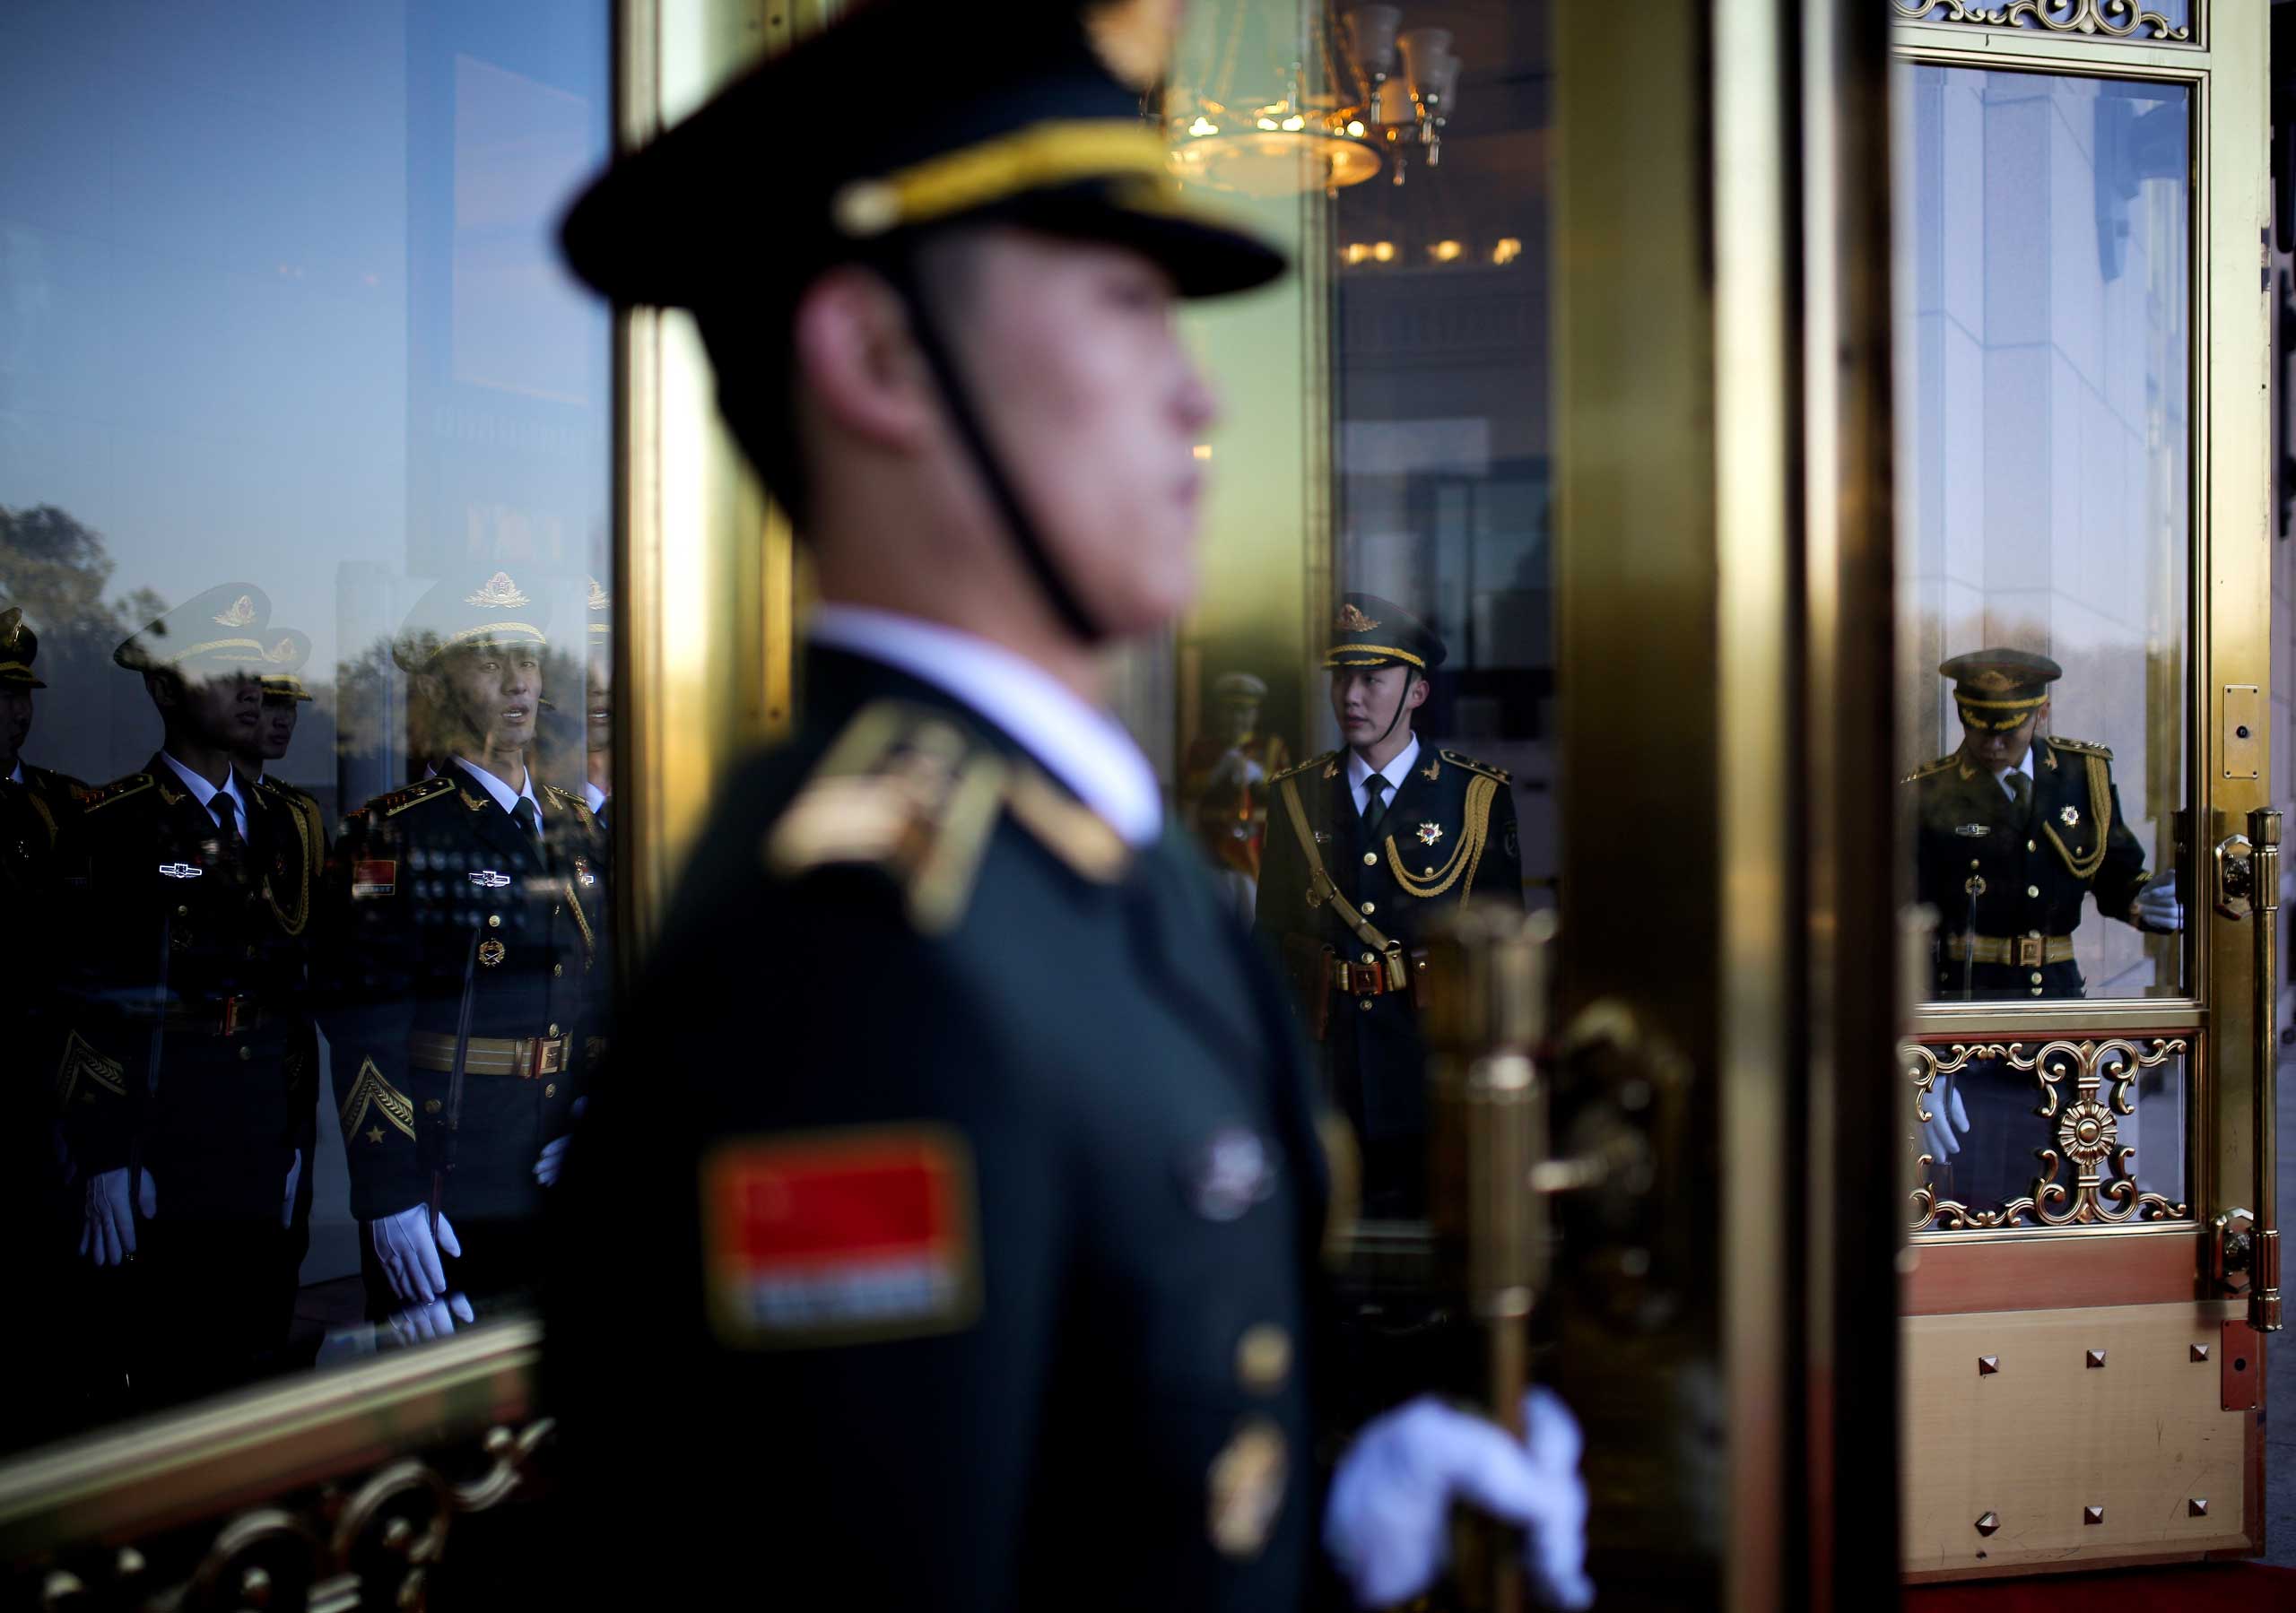 Nov. 13, 2014. Chinese guards of honor prepare at the main entrance of the Great Hall of the People in Beijing for a welcome ceremony held by Chinese President Xi Jinping for visiting Mexican President Enrique Pena Nieto.